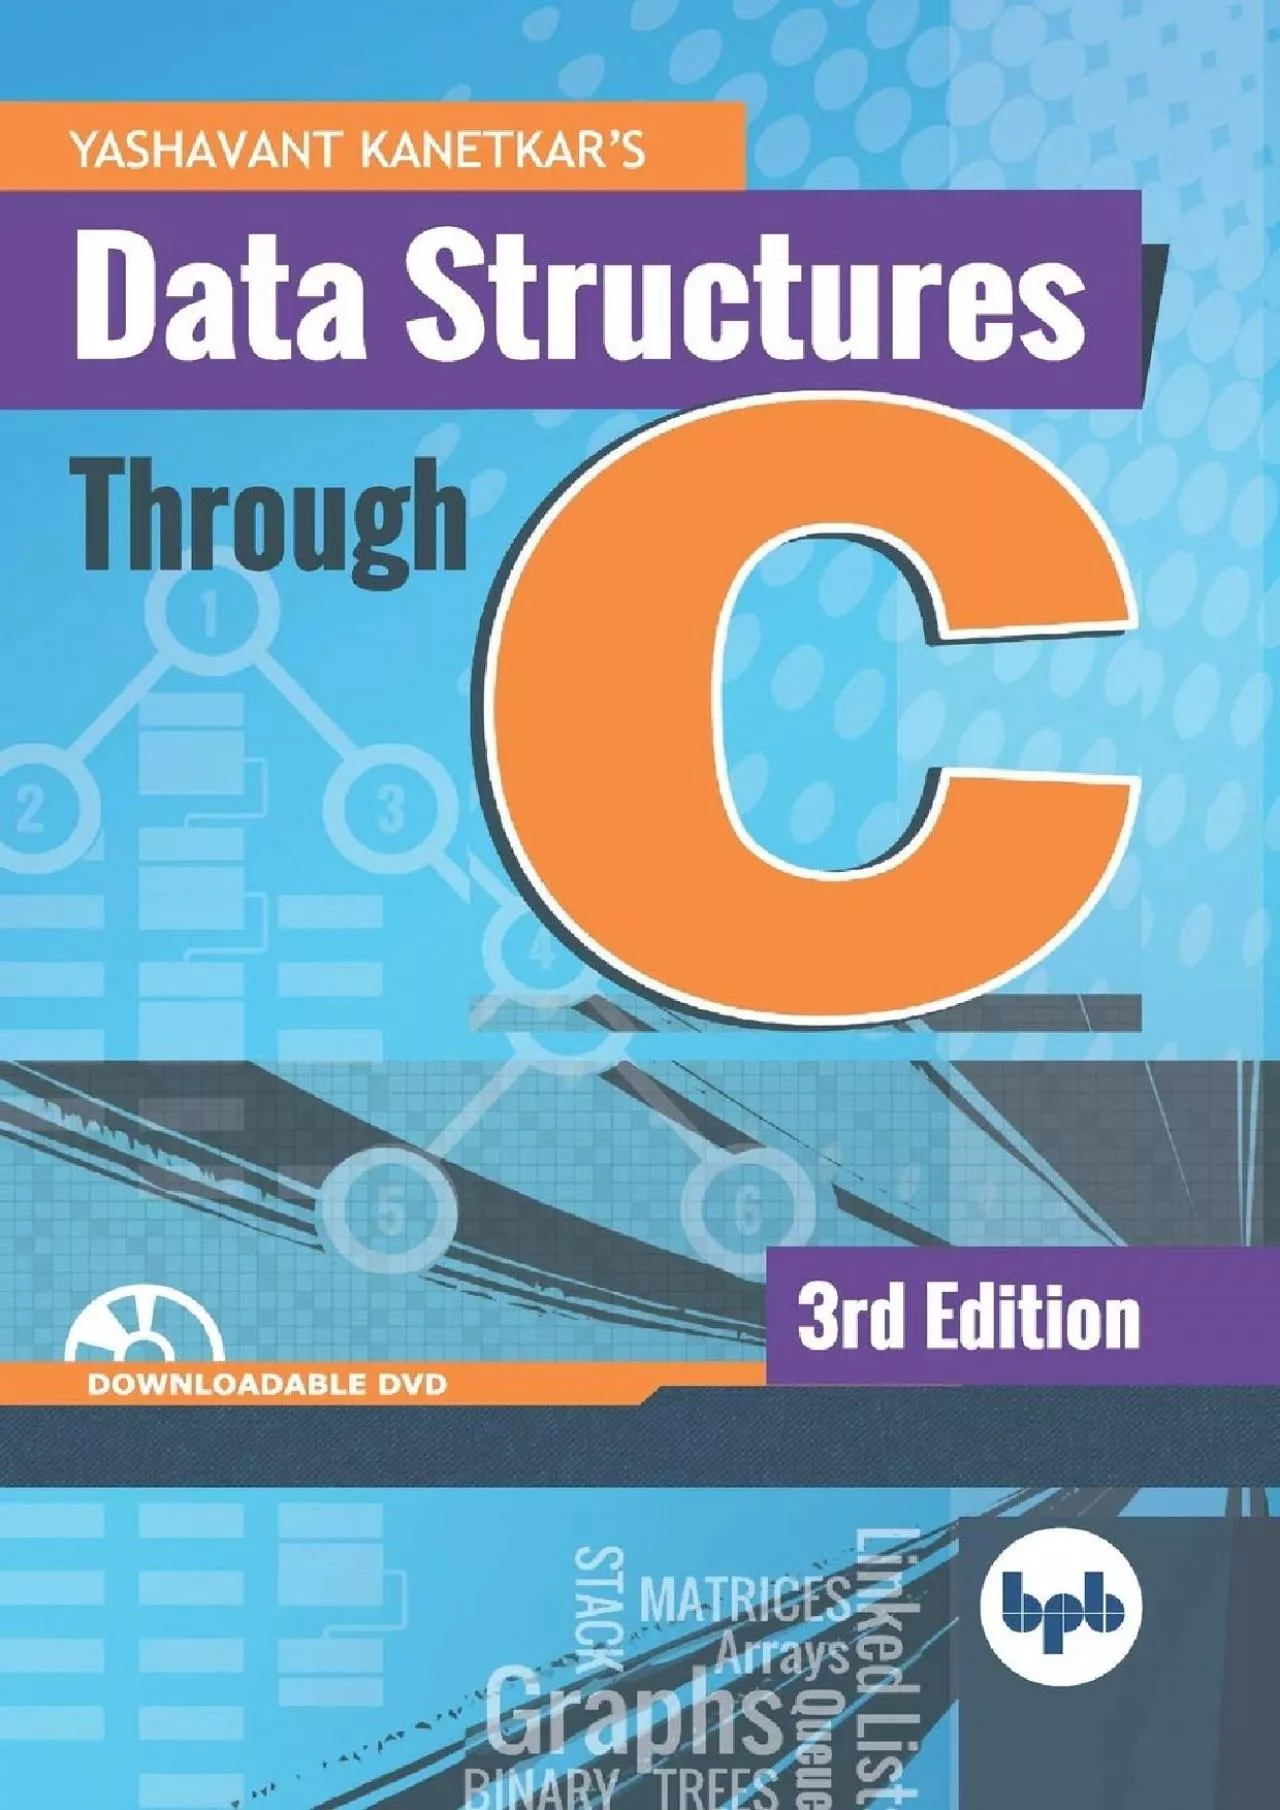 [BEST]-Data Structures Through C: Learn the fundamentals of Data Structures through C